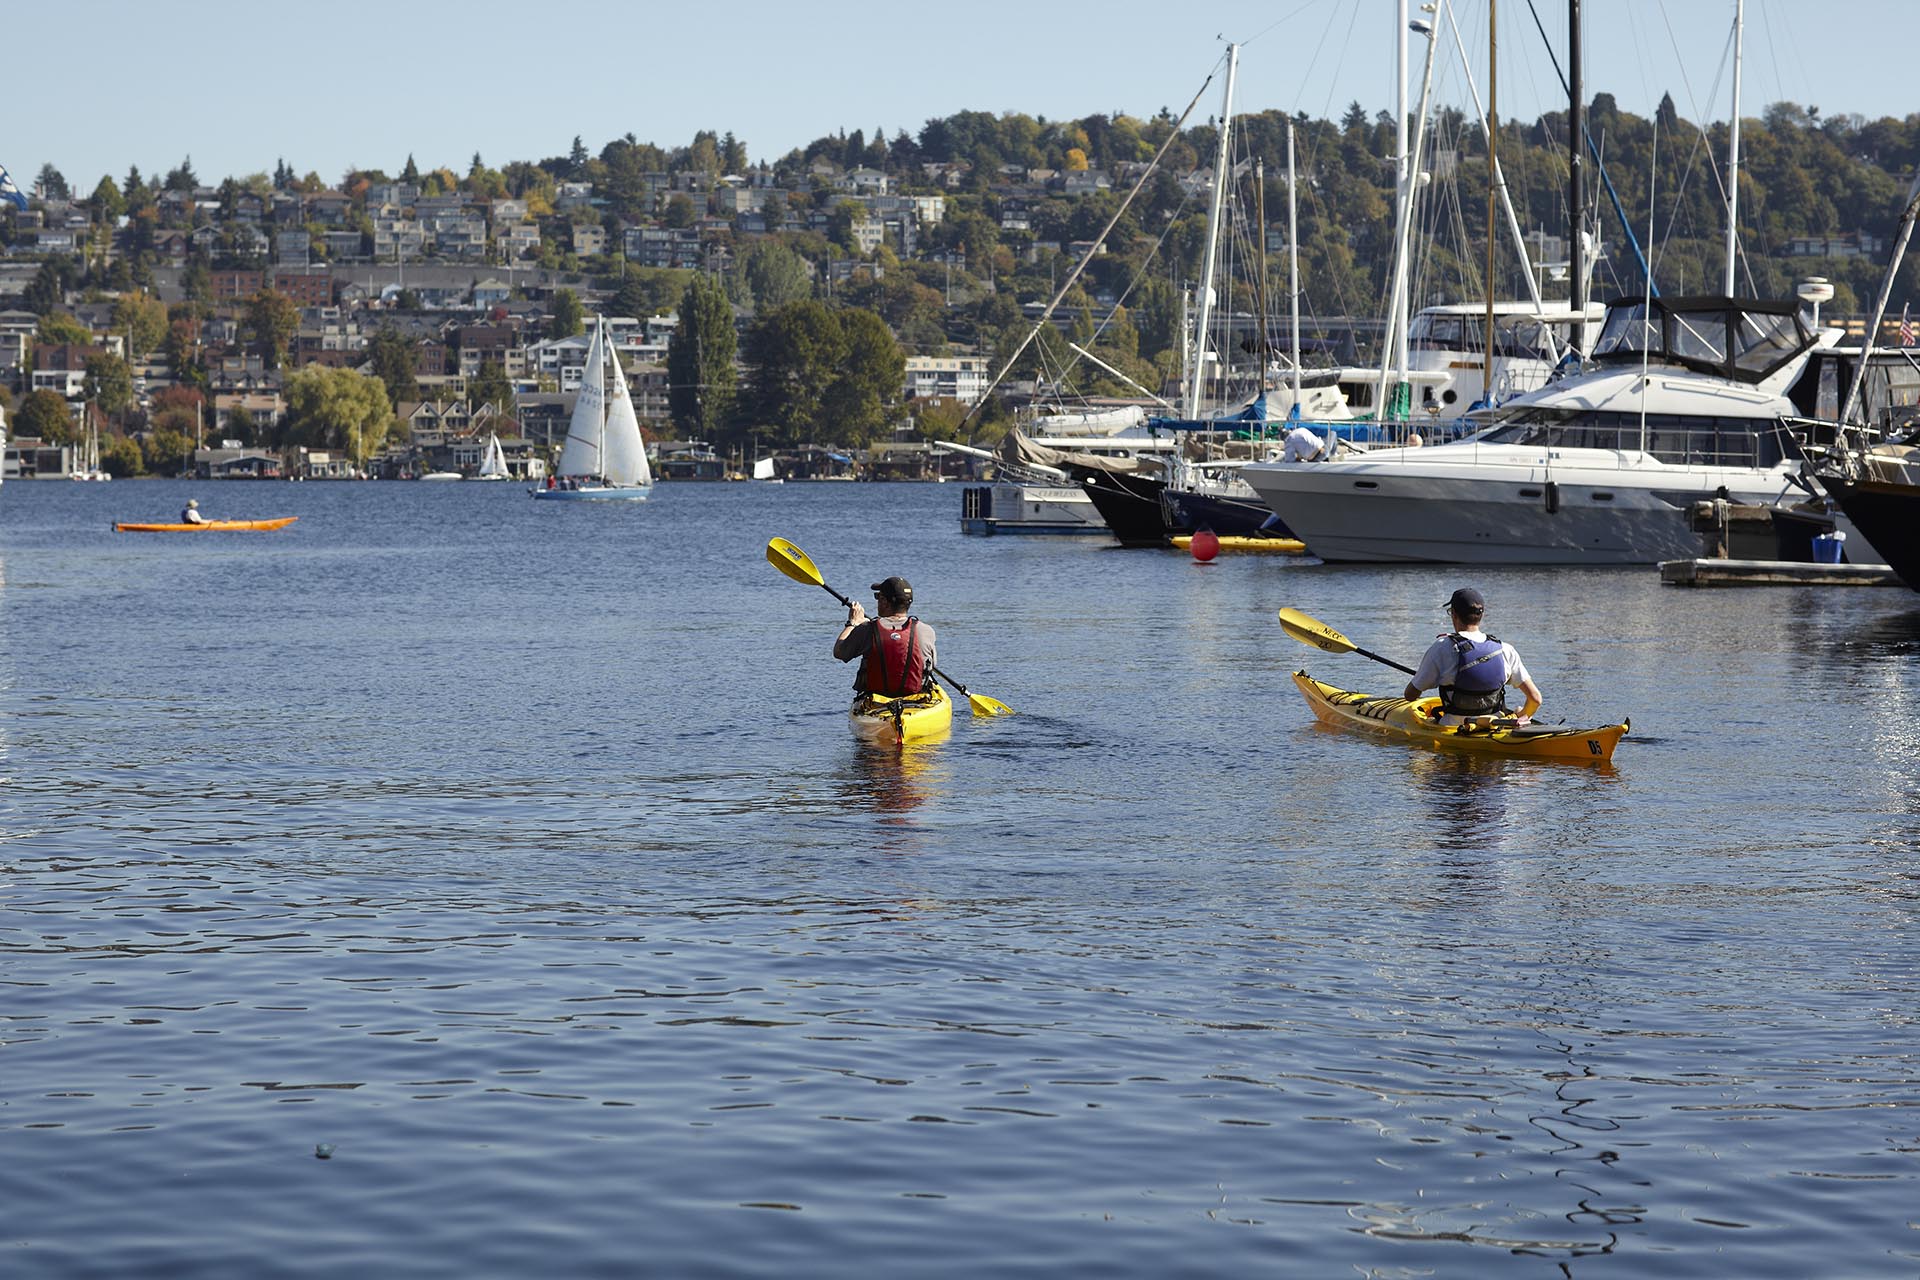 A pair of kayakers gliding past a flank of moored boats in the lake, with the city line in the background